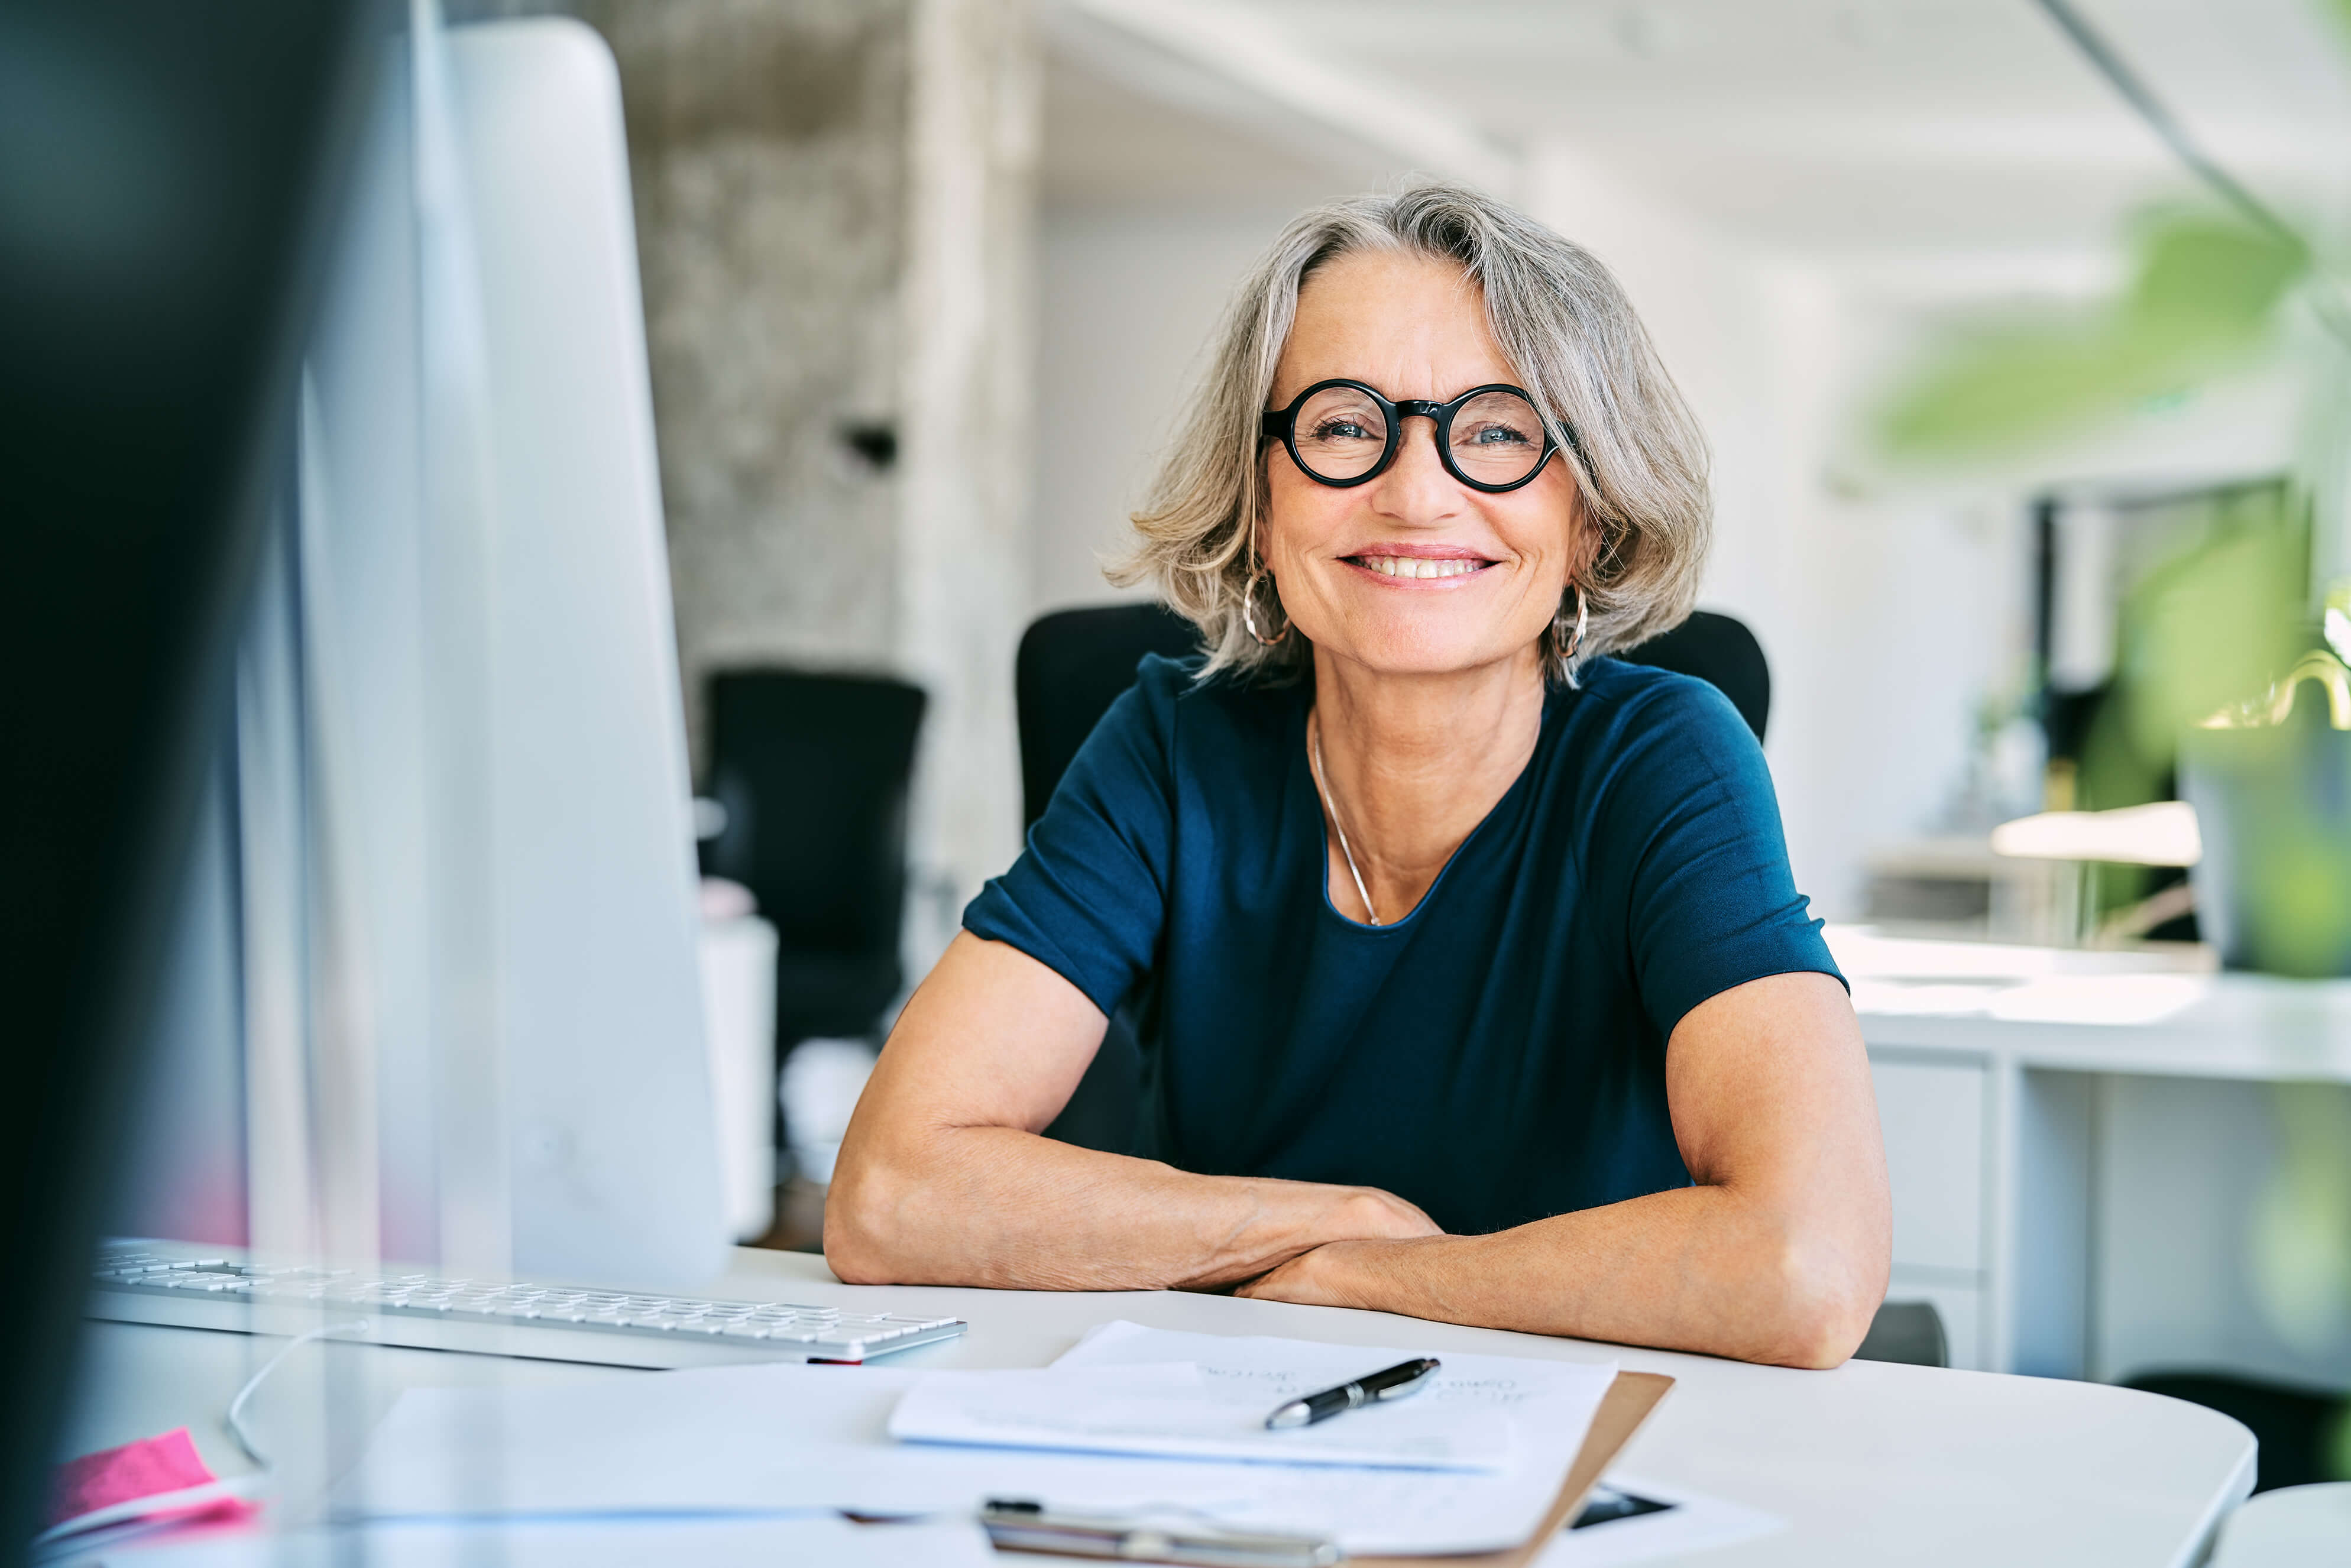 Lady with glasses sat at a work desk smiling